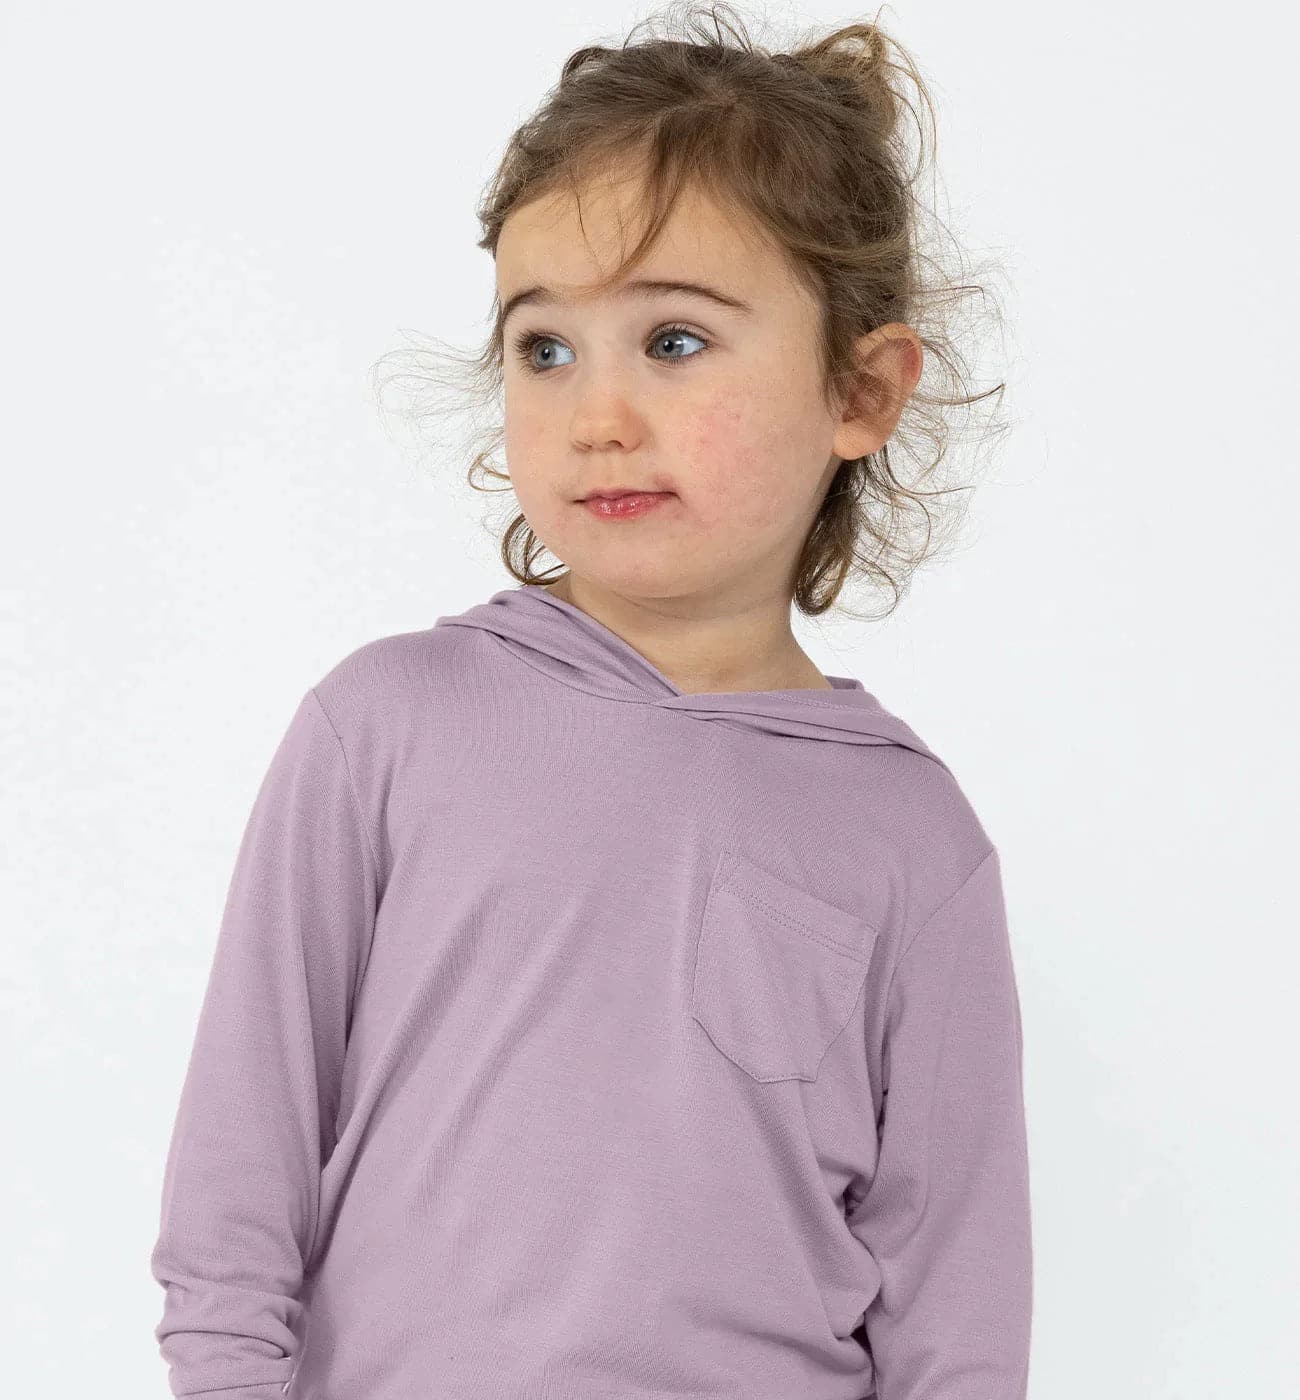 Featuring the Toddler Bamboo Shade Hoody kid's and babies, kid's thermal layering manufactured by Free Fly shown here from a fourth angle.